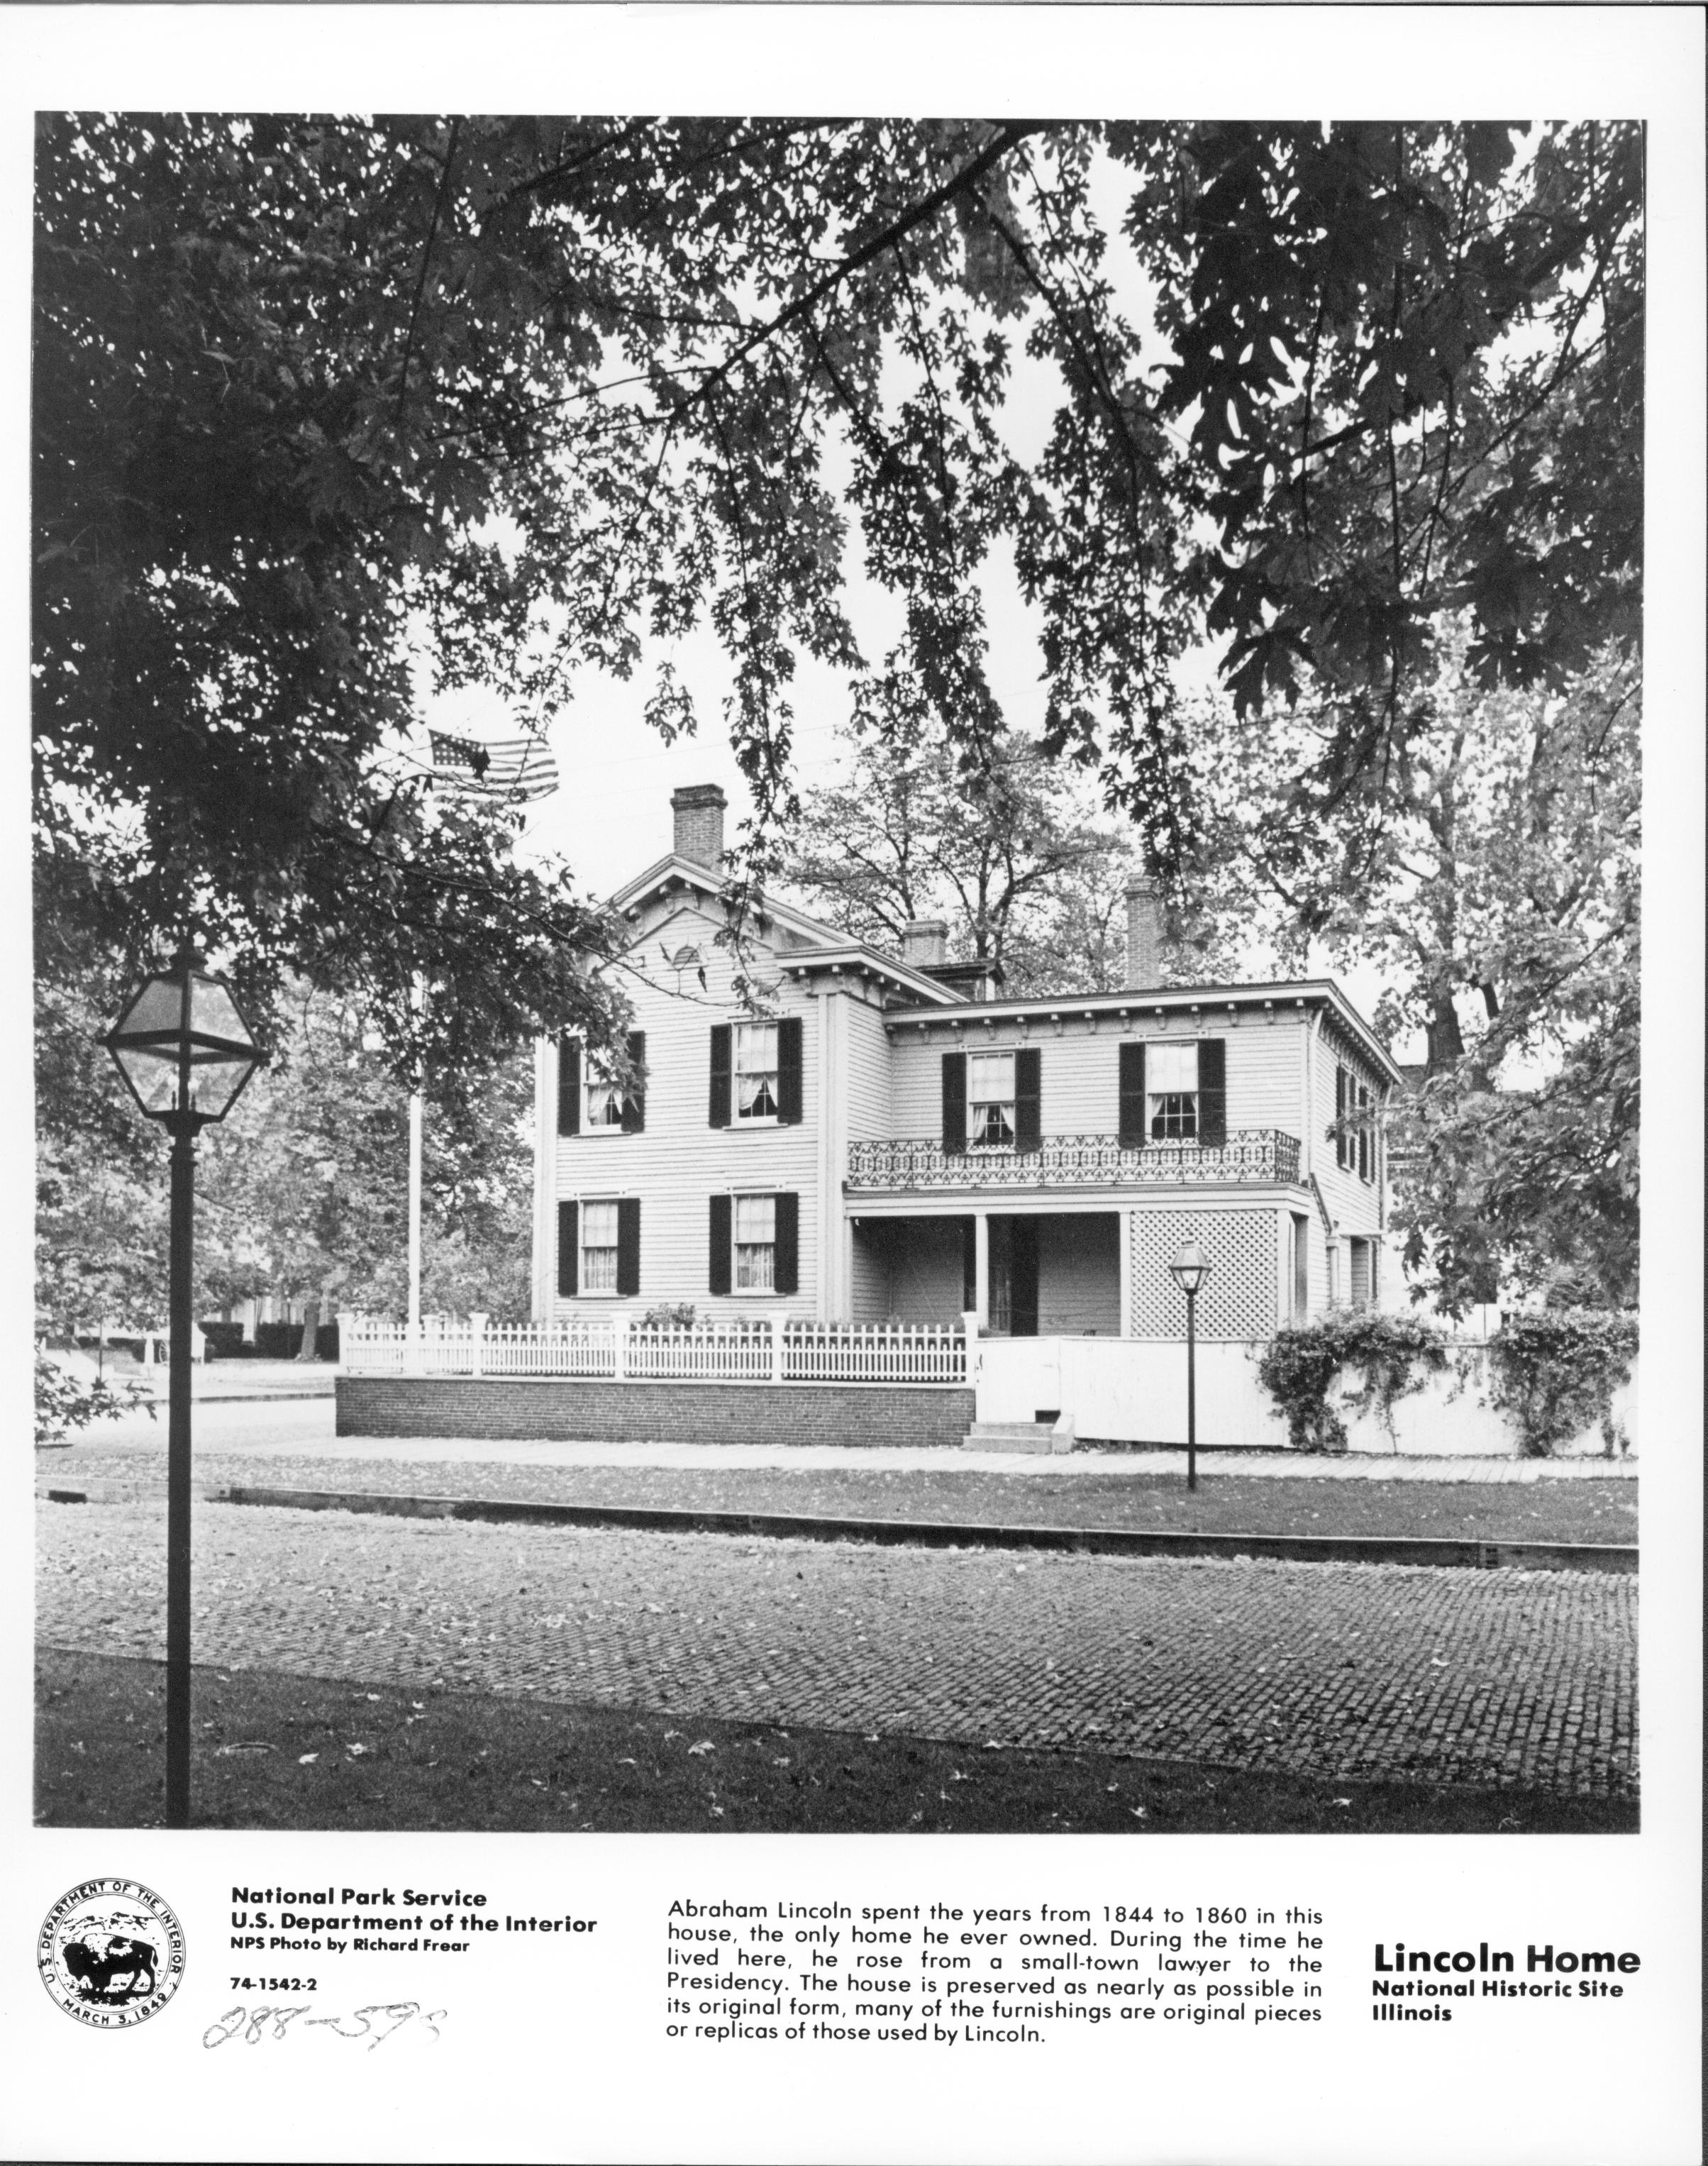 Official Lincoln Home photo showing South elevation. Jackson Street in foreground bricked over. Dean House in far background left. Flagpole flying US flag in corner behind fence. Information about site and logo for Dept. of Interior on information bar at bottom. Looking Northwest from south of Jackson Street Lincoln Home, Jackson, flagpole, Dean